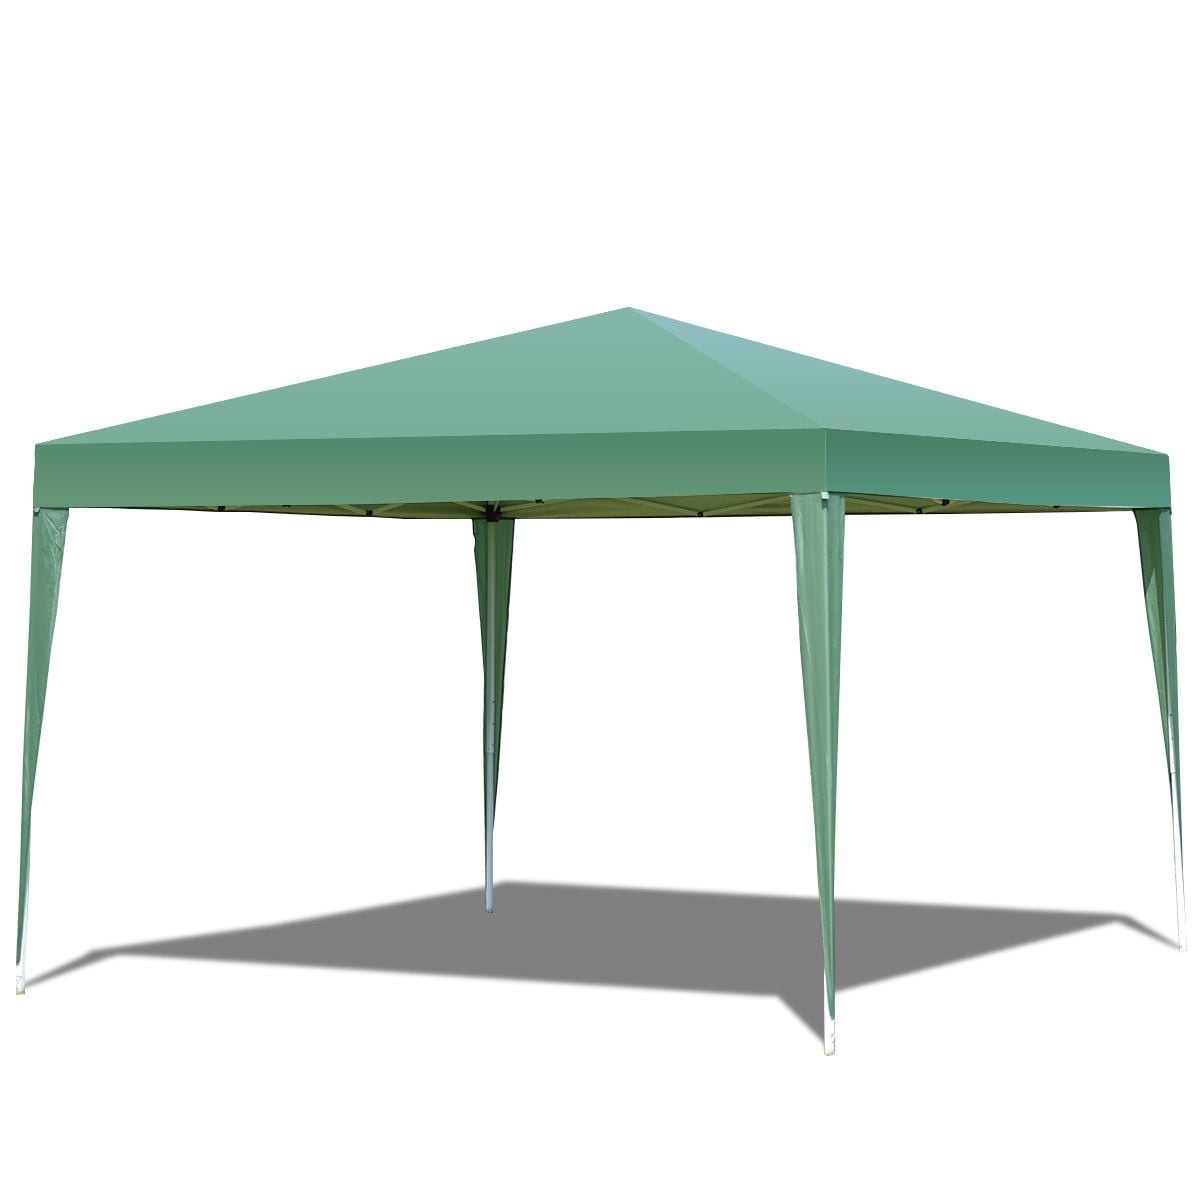 Outdoor Foldable Portable Shelter Gazebo Canopy Tent -Green